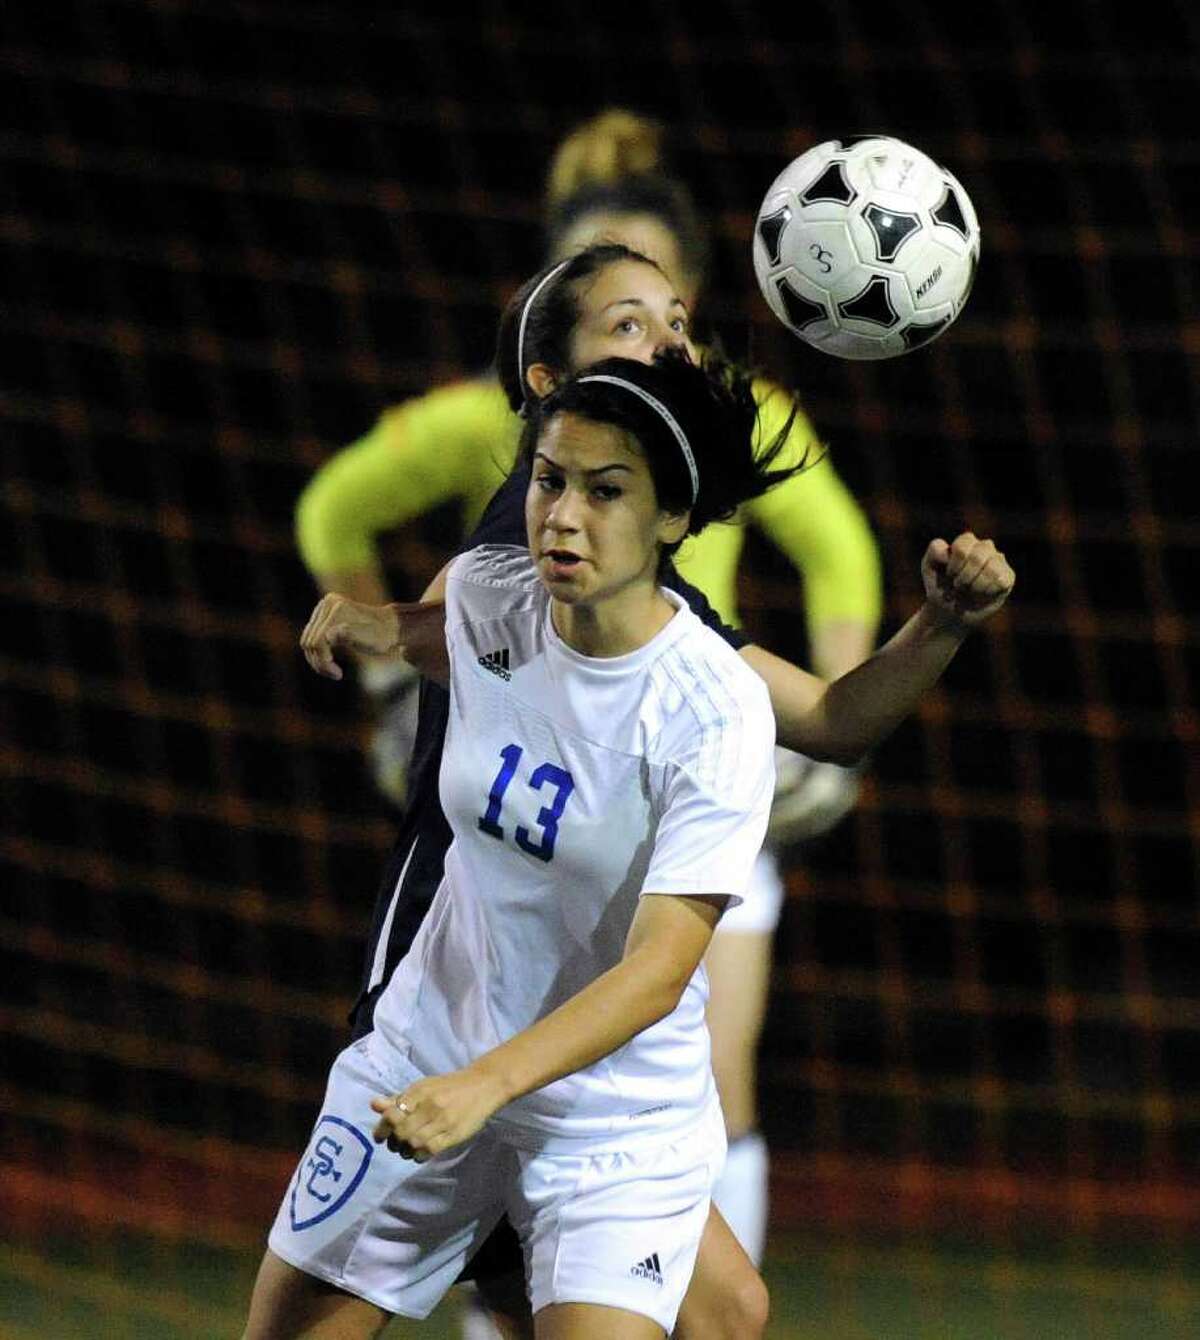 Hailey Ardoin of Clemens High SChool controls the ball against Smithson Valley during girls soccer action at Clemens High School on Friday, March 23, 2012. Billy Calzada / San Antonio Express-News